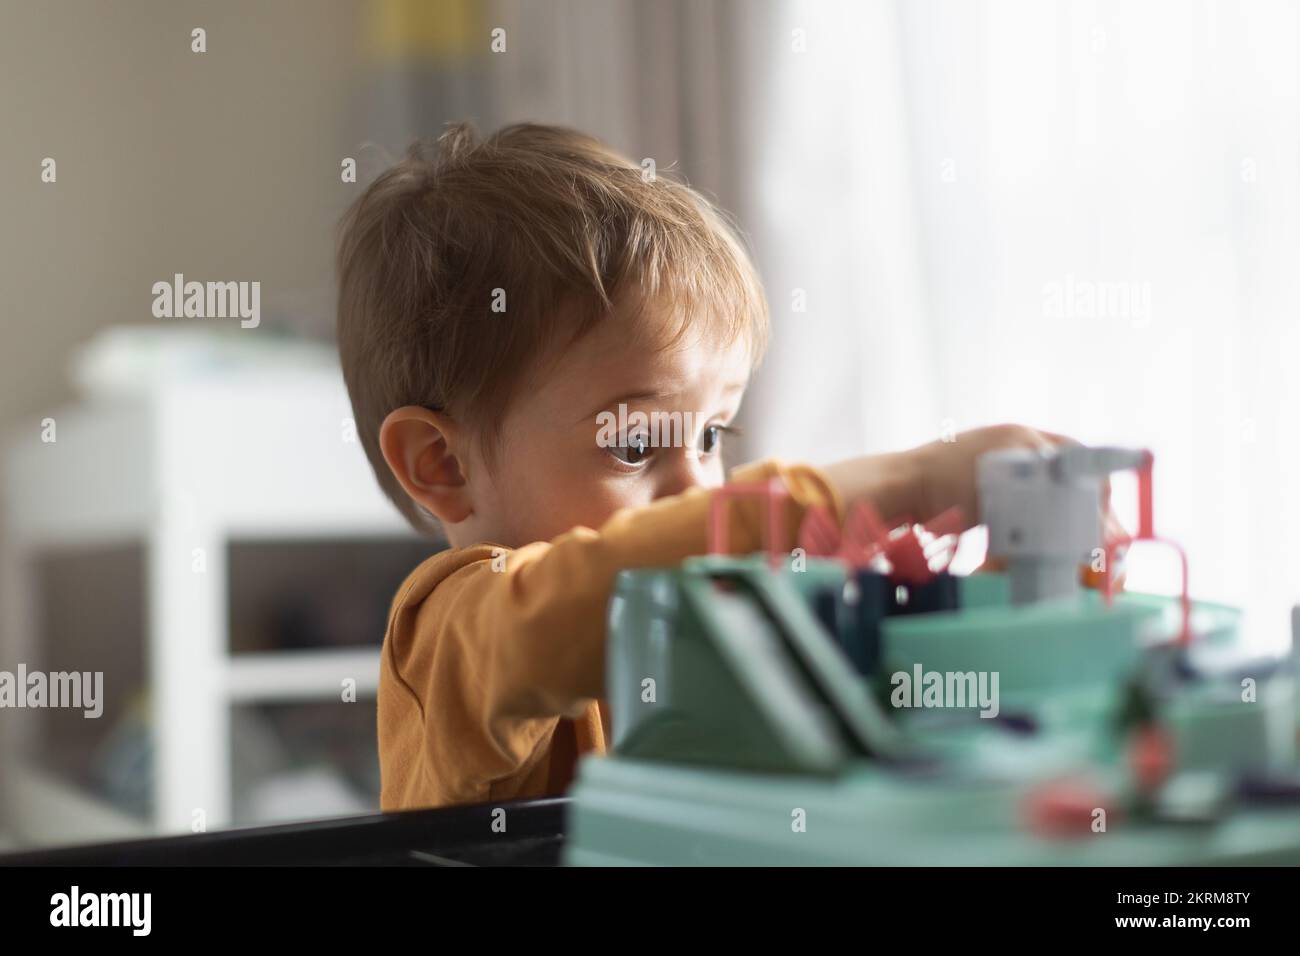 Side view of adorable little blond haired boy in orange sweater sitting at table and playing with toy while spending time at home Stock Photo